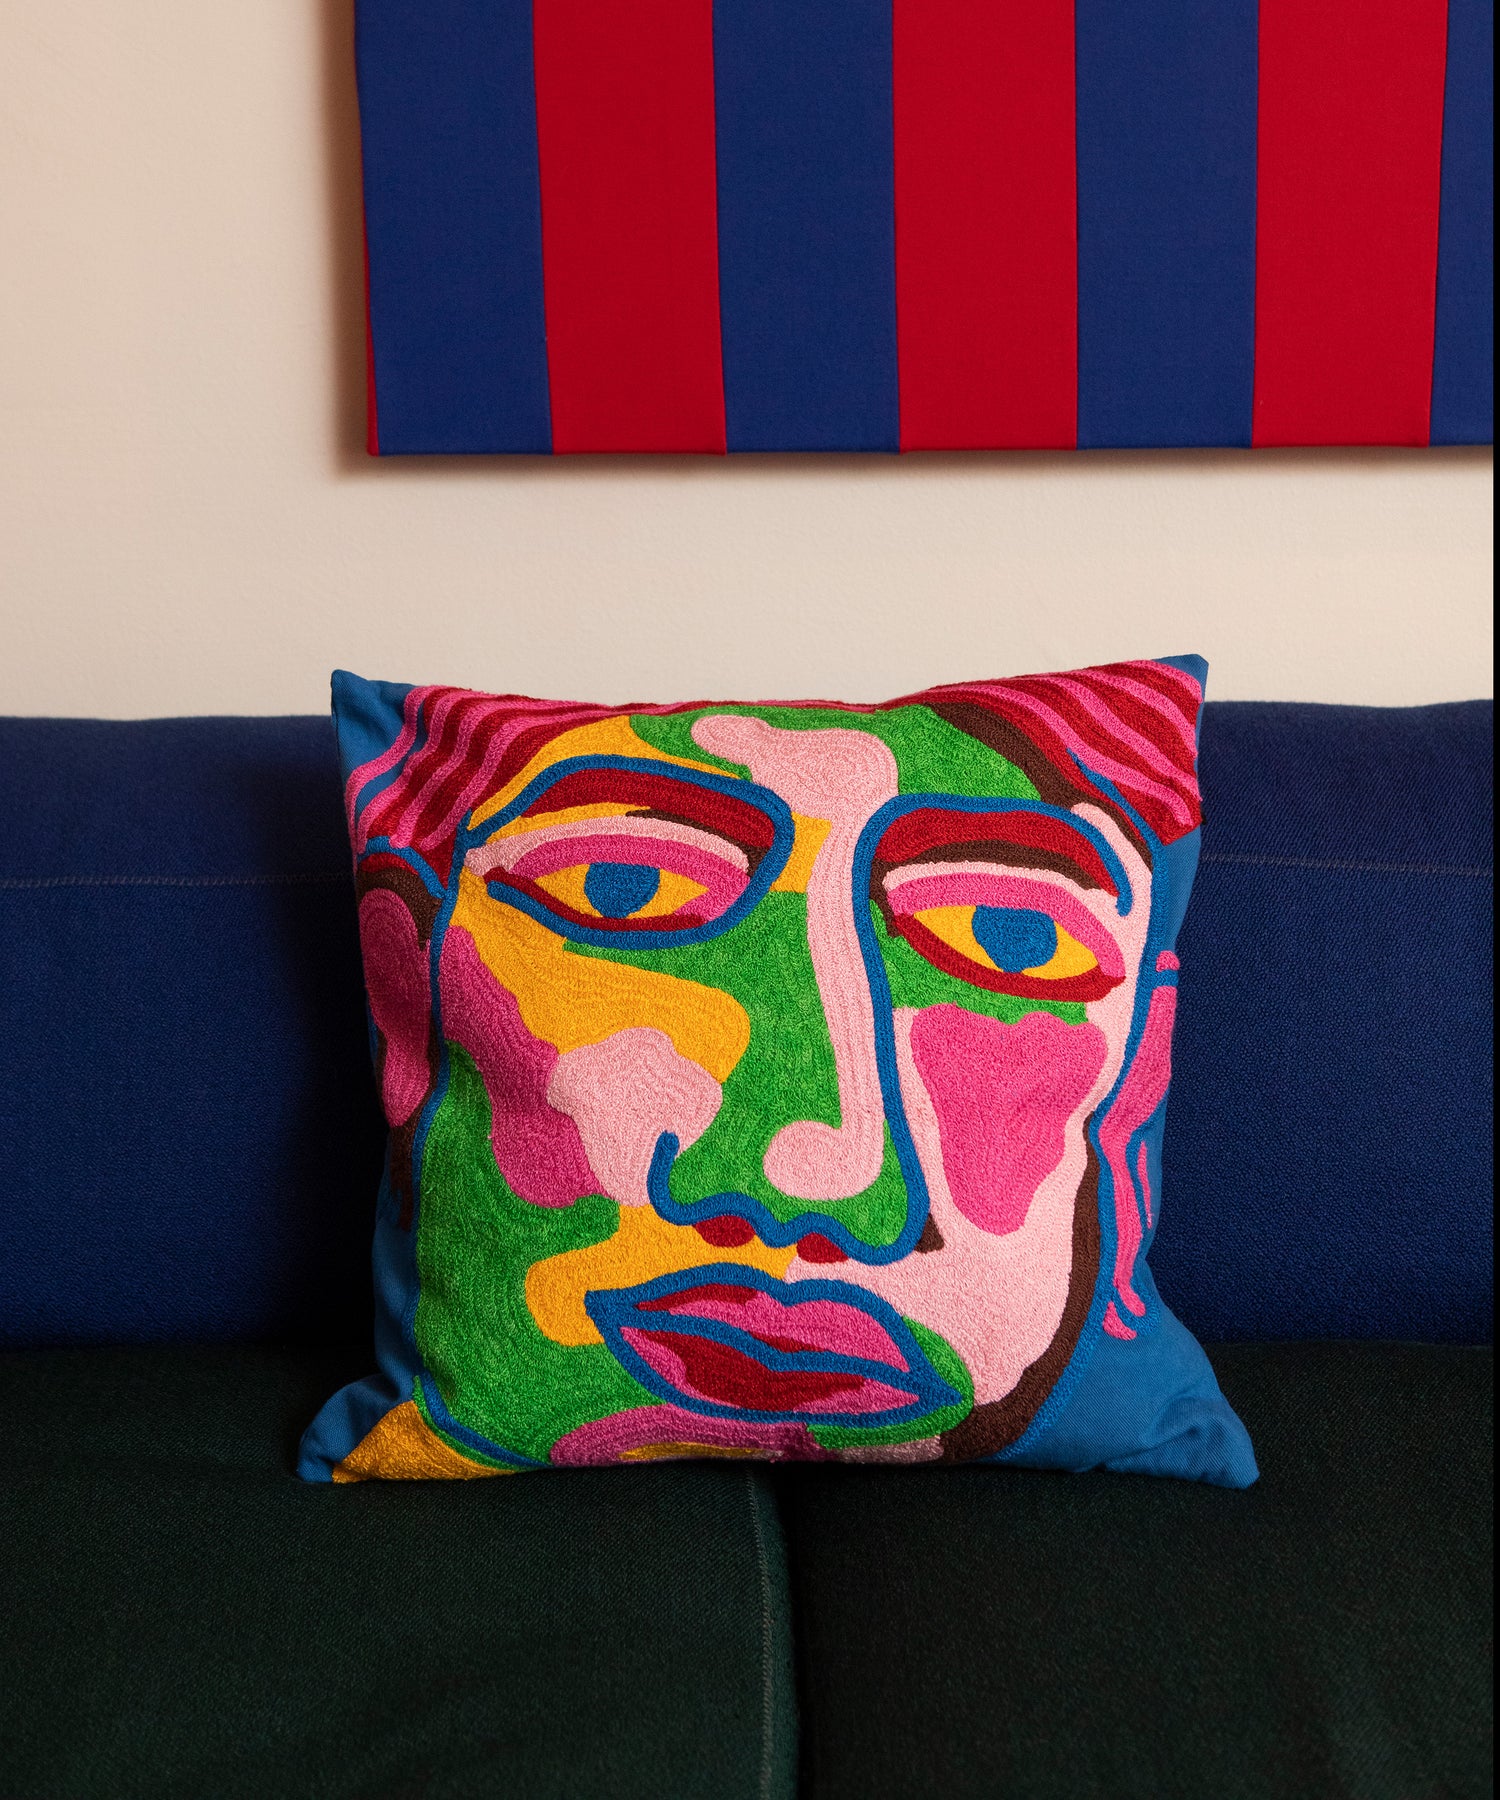 Detail of the Portrait Pillow by itself on a blue and green couch.